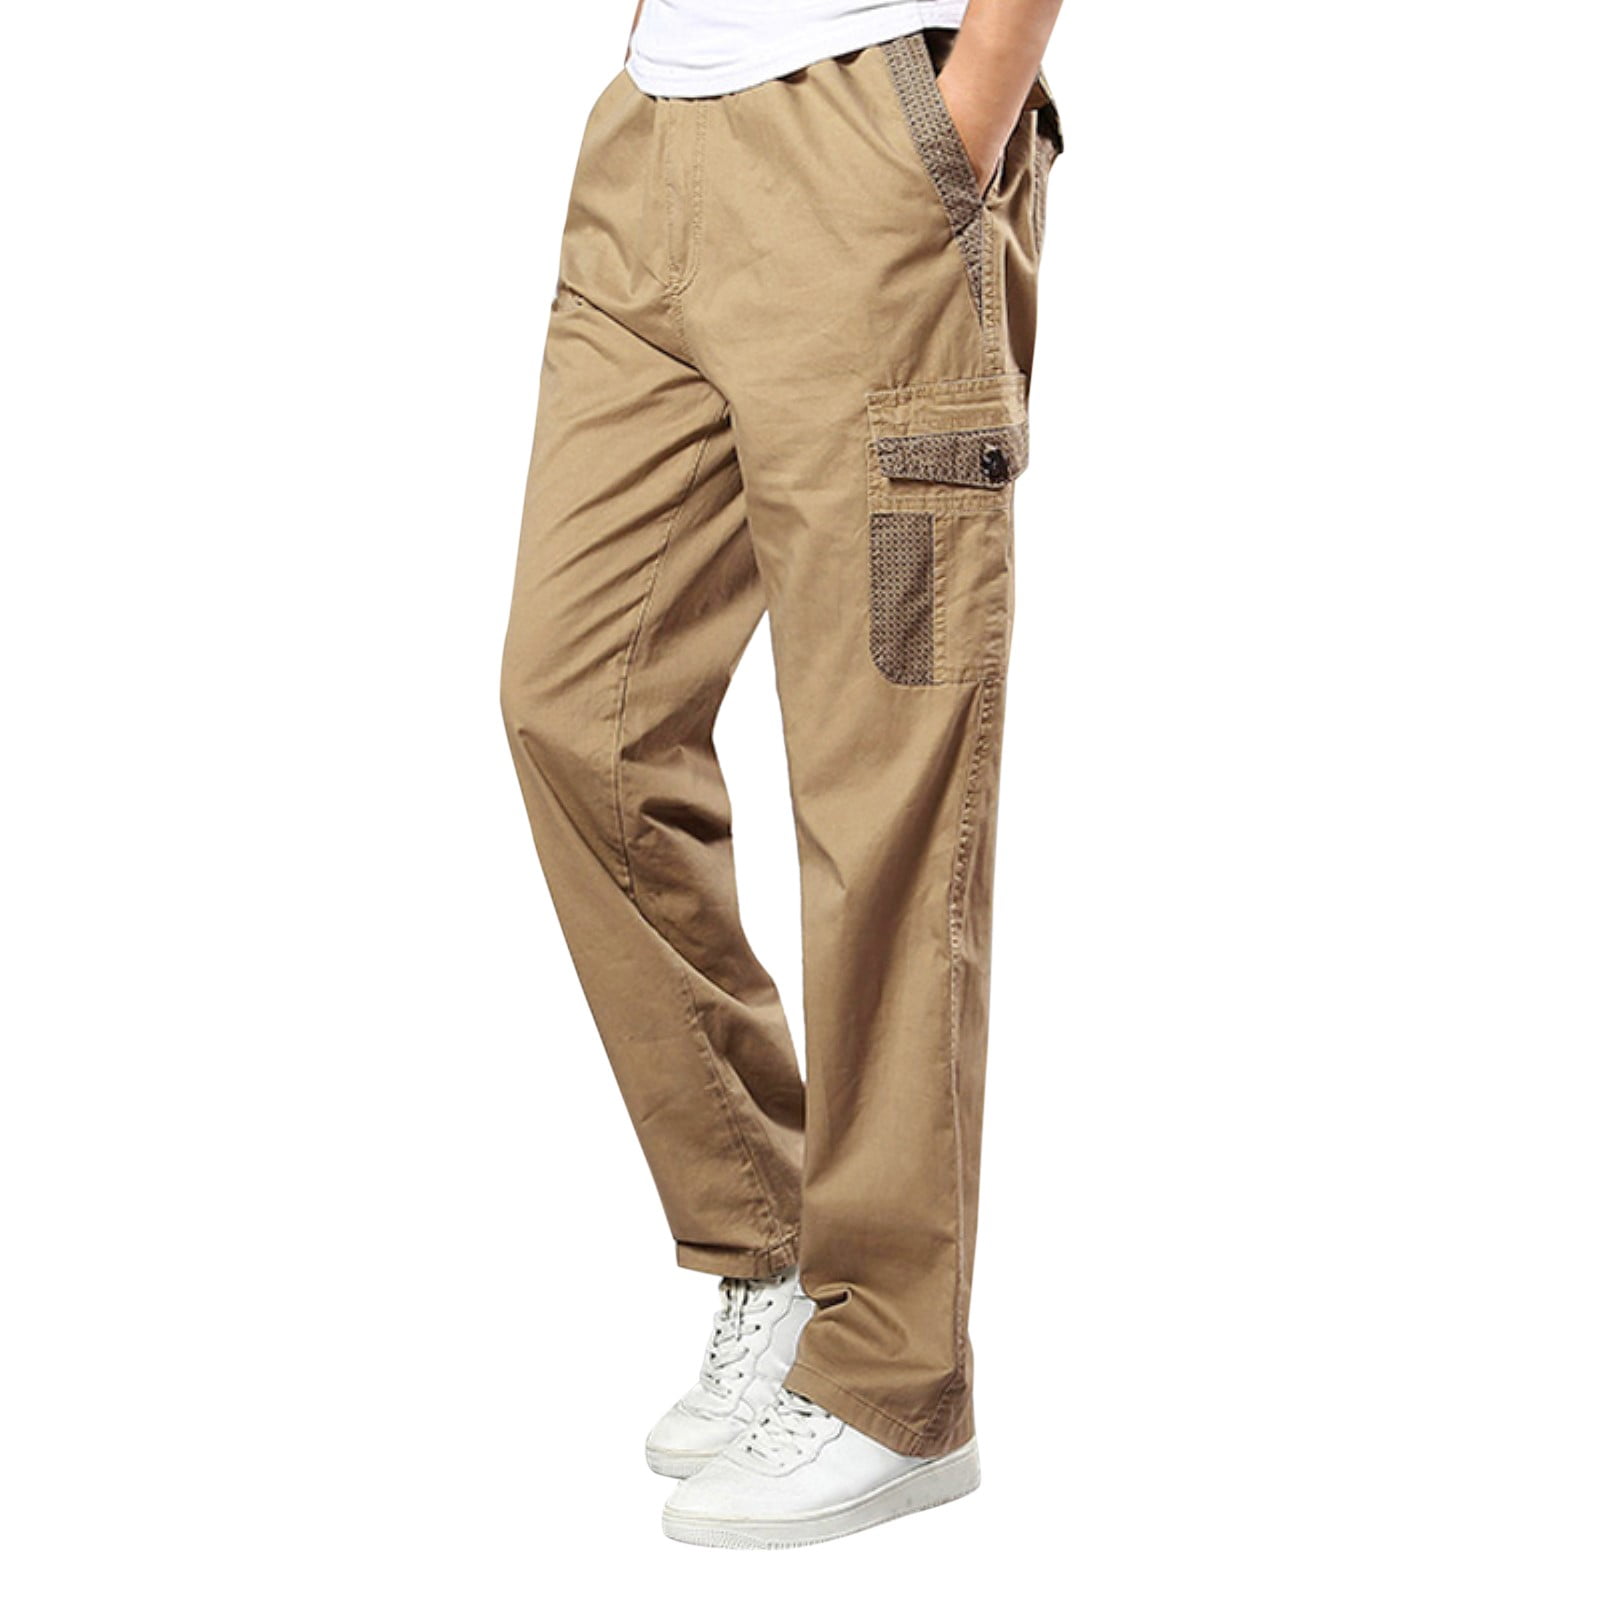 Kusou Mens Solid Color Summer Casual All Match Pants Fashionable 